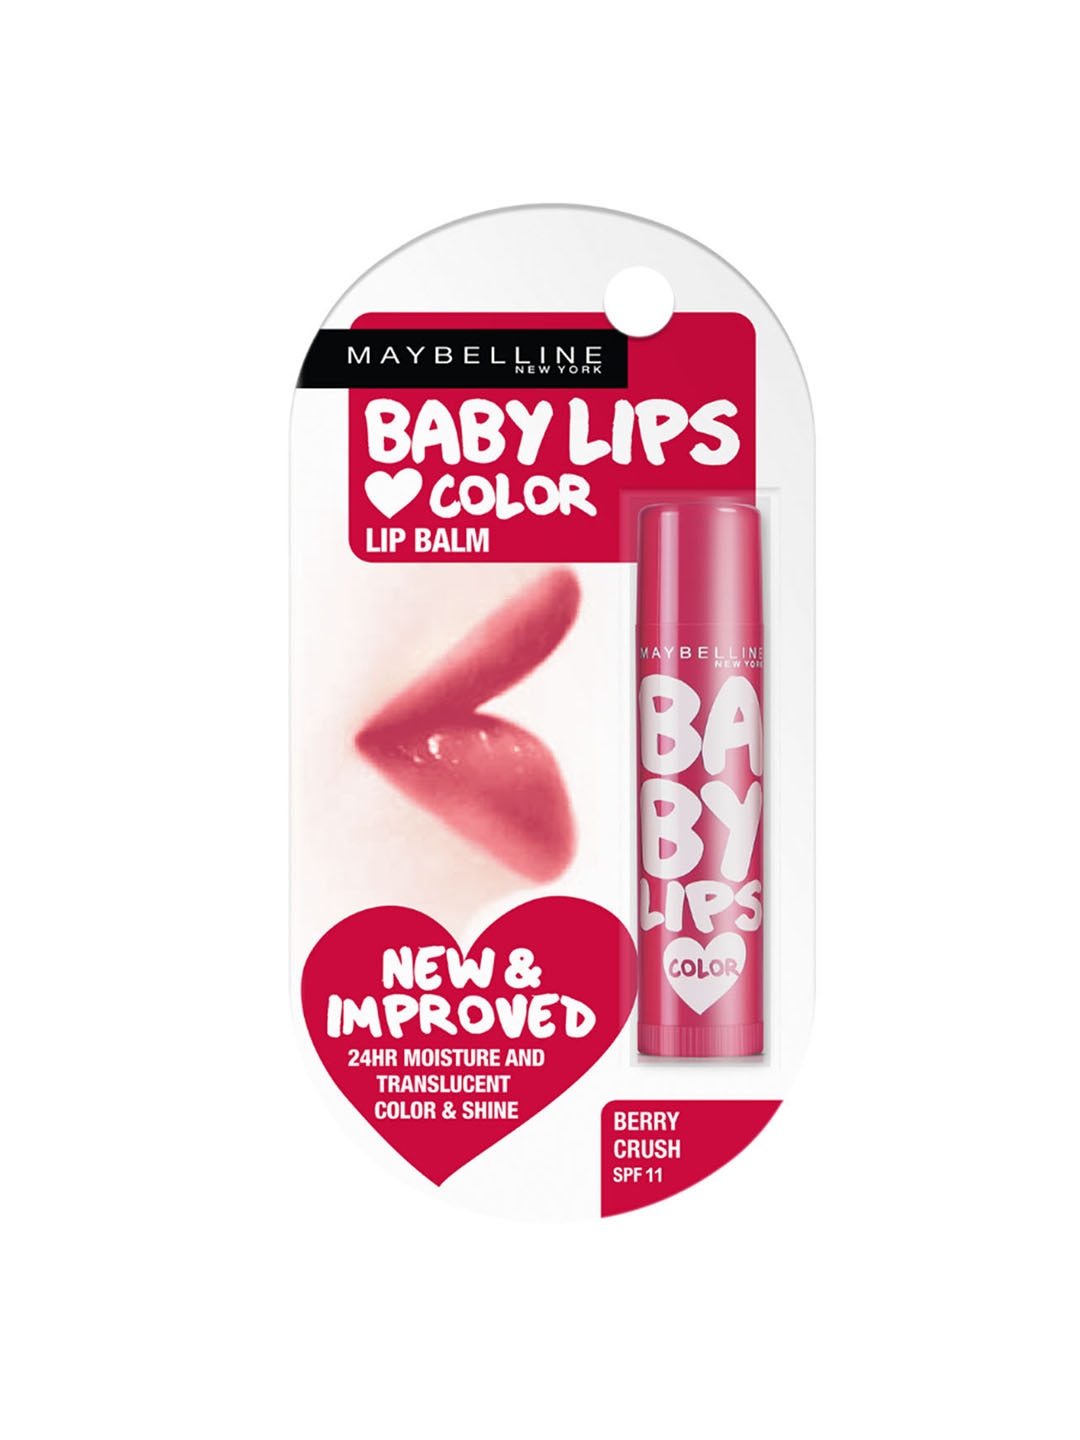 Balm Tinted Lips | for Myntra Women Crush Free Berry Baby Lip Color With Maybelline Flush Lip Balm Winter Balm Lip 2185739 - Buy